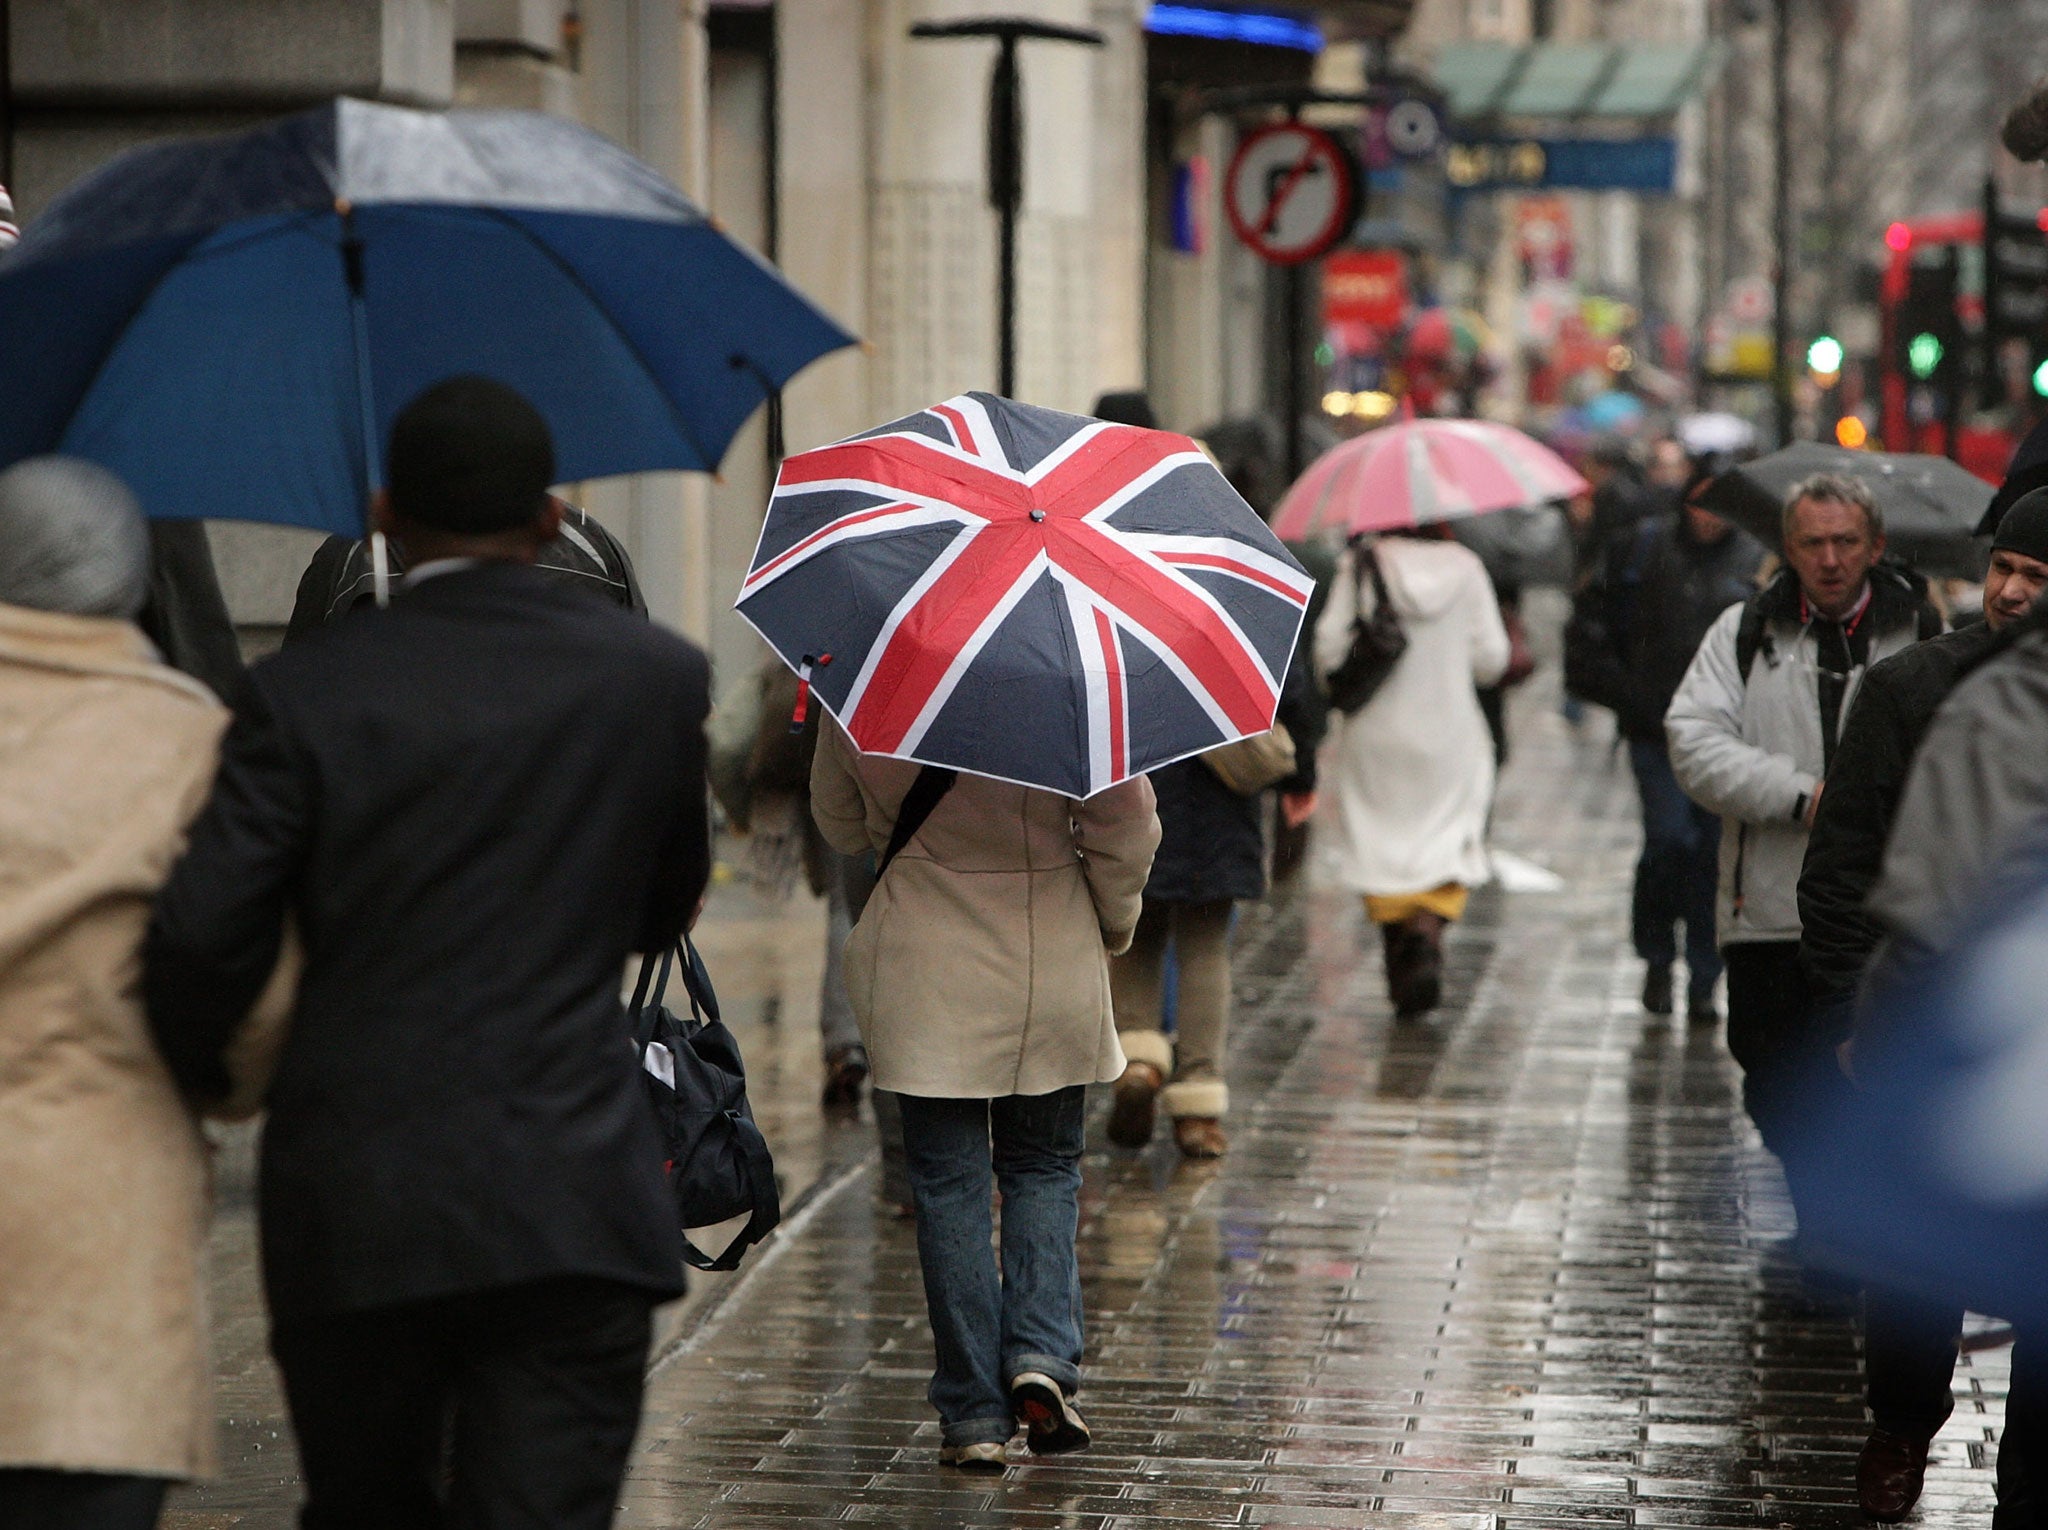 The Met Office is to hold an emergency meeting of experts to discuss the increasingly unusual weather in the UK